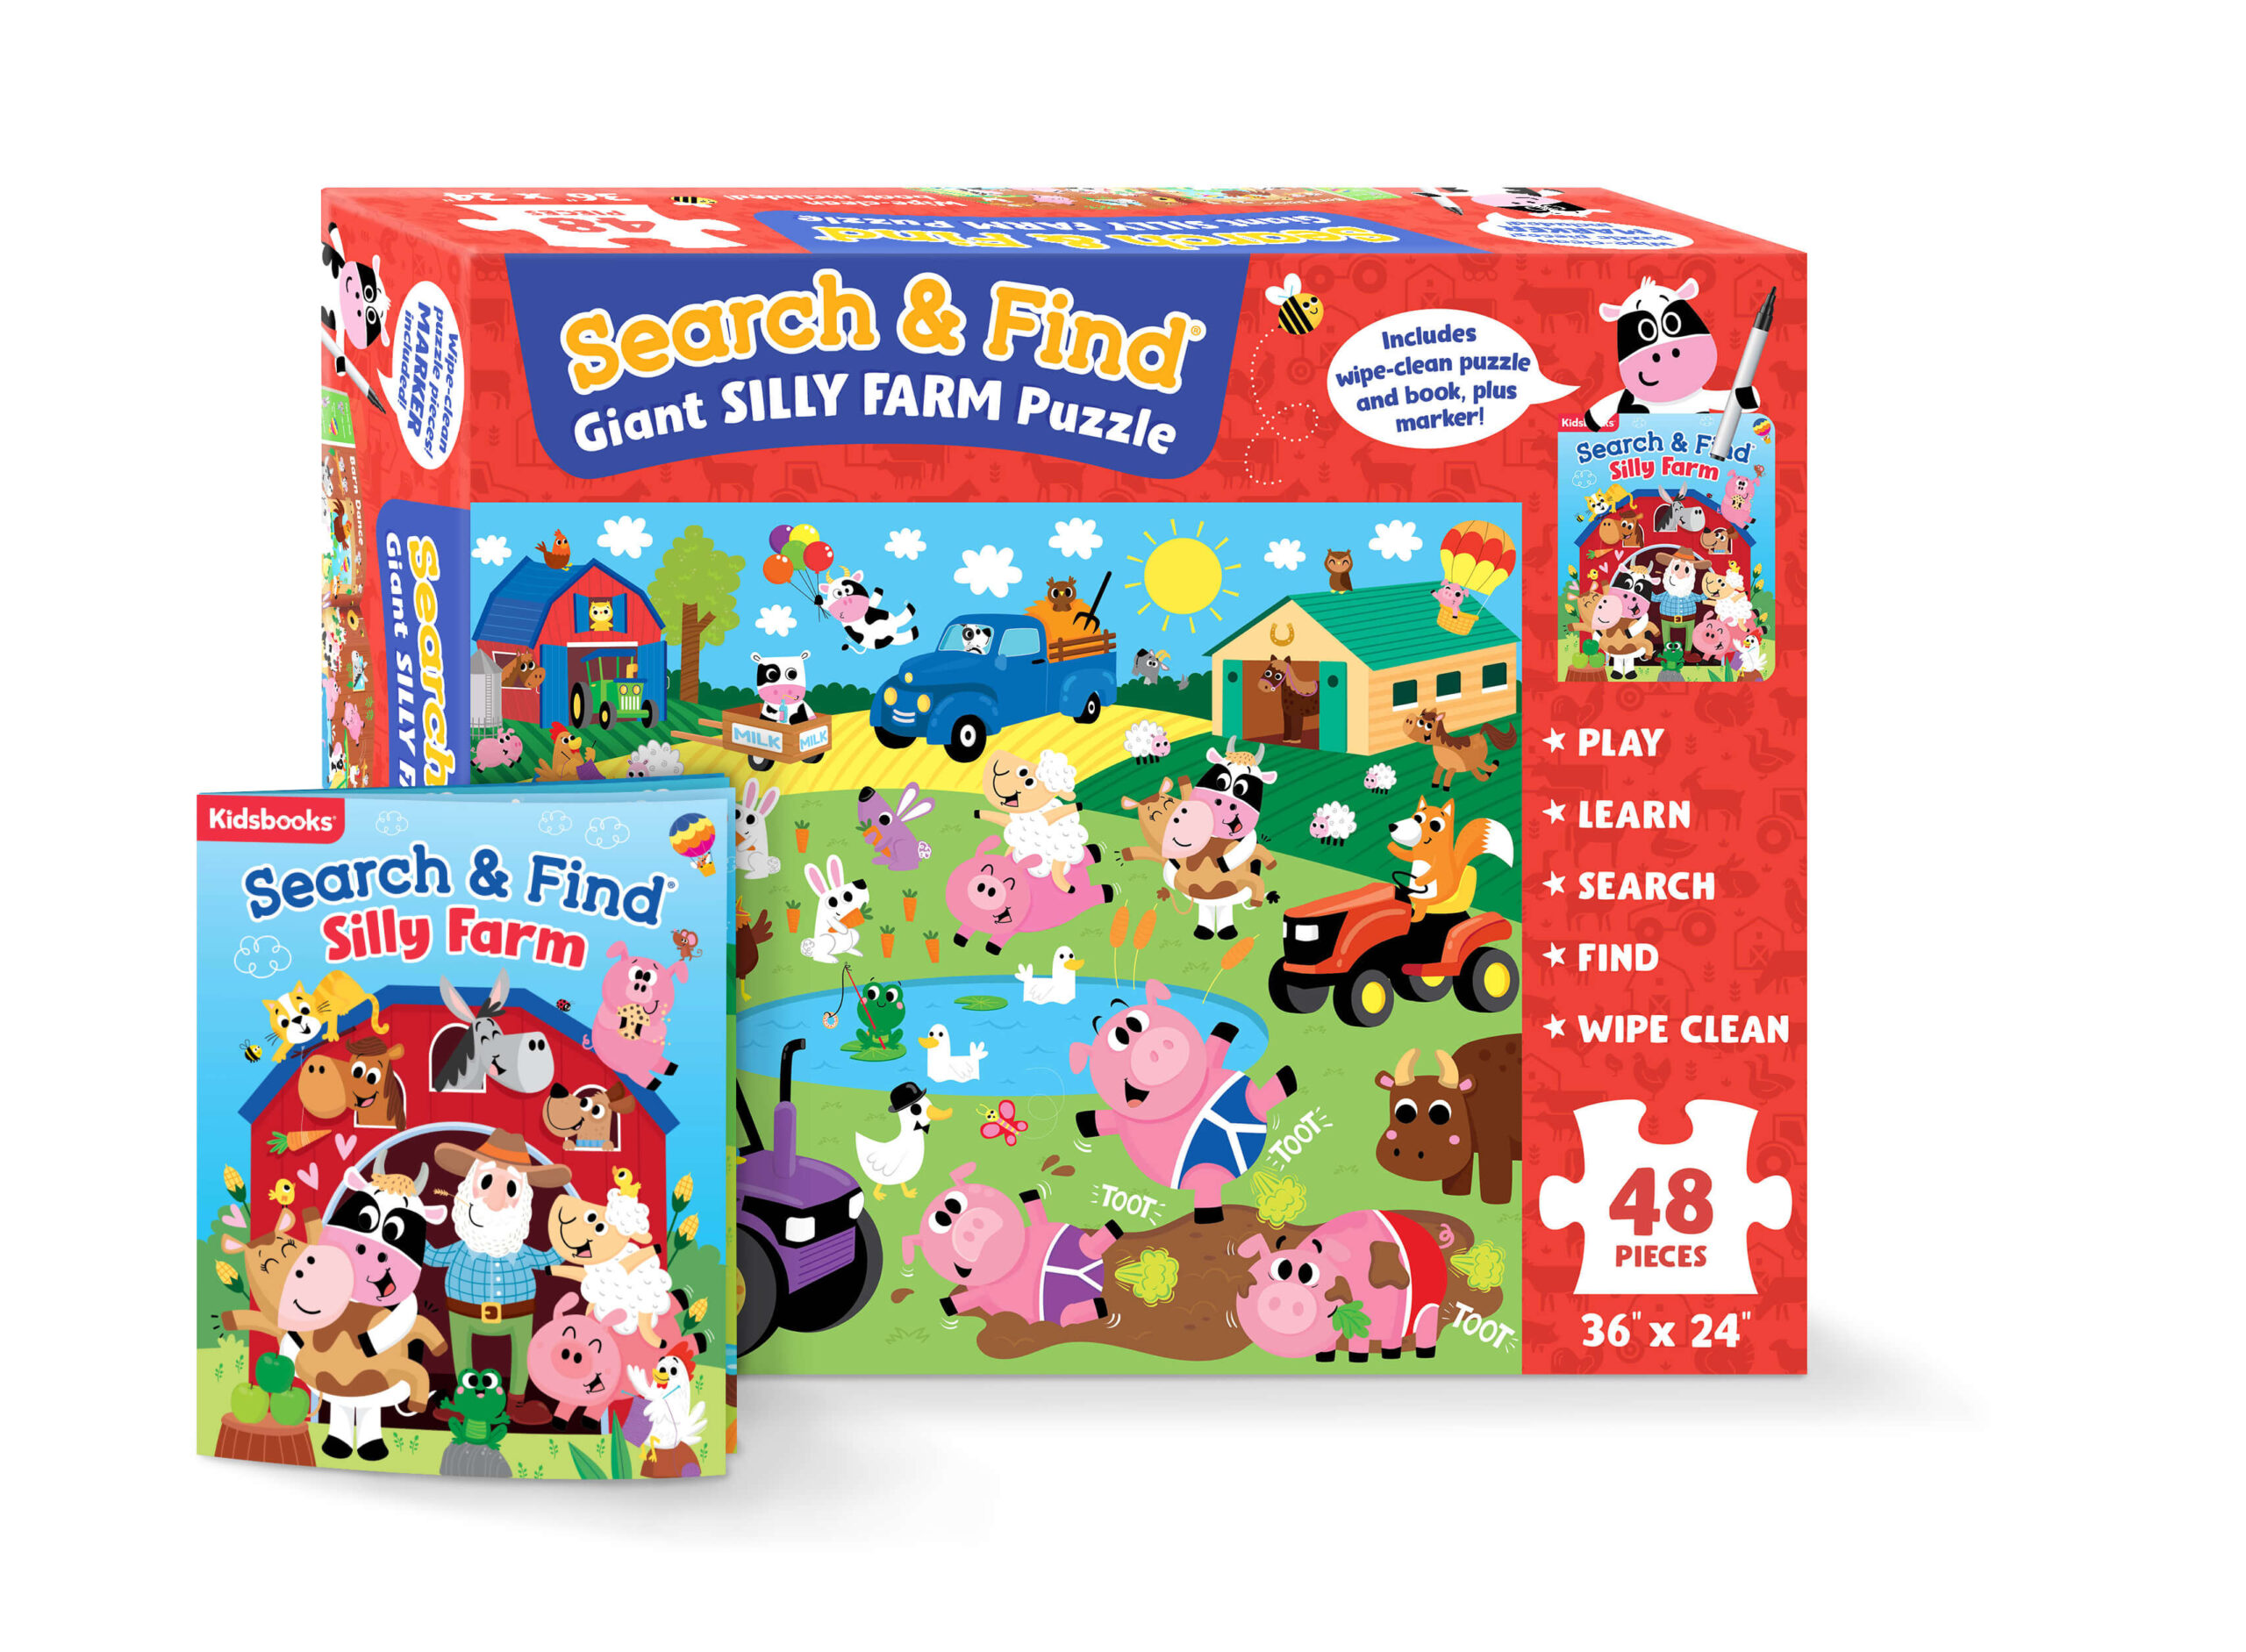 Search & Find Giant Silly Farm Puzzle and Book Set